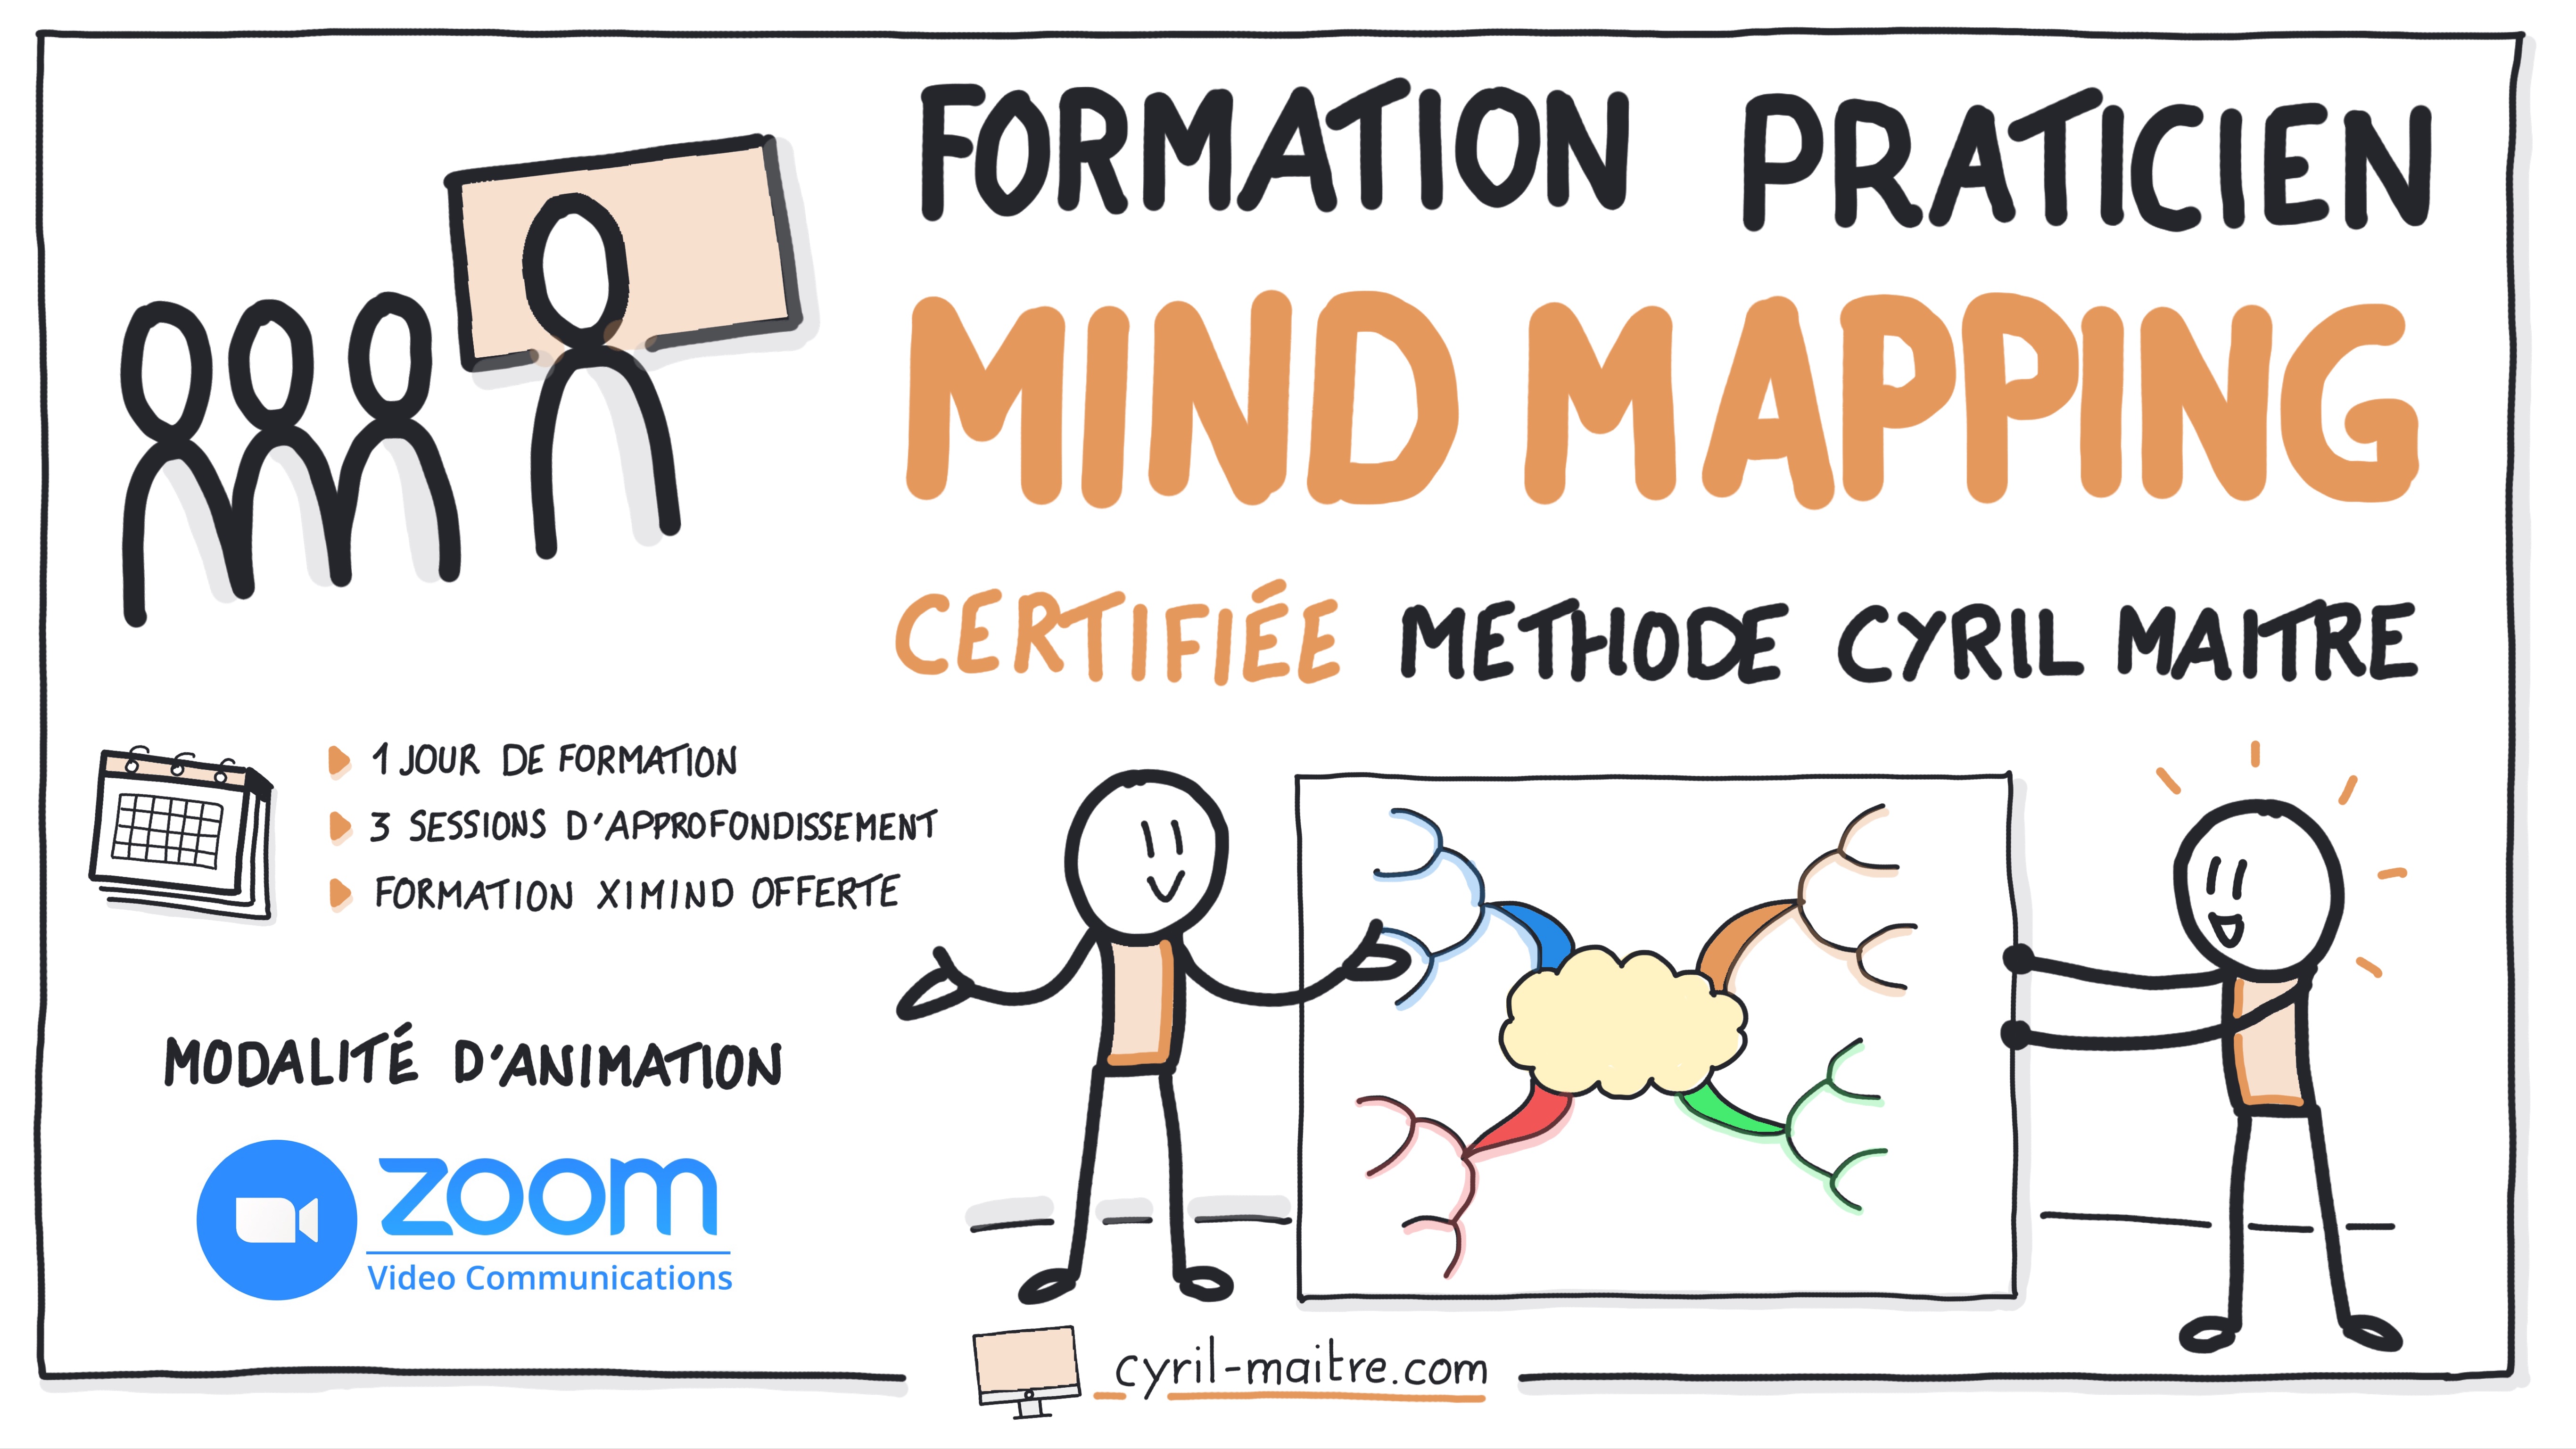 Formation certifiante Praticien MIND MAPPING